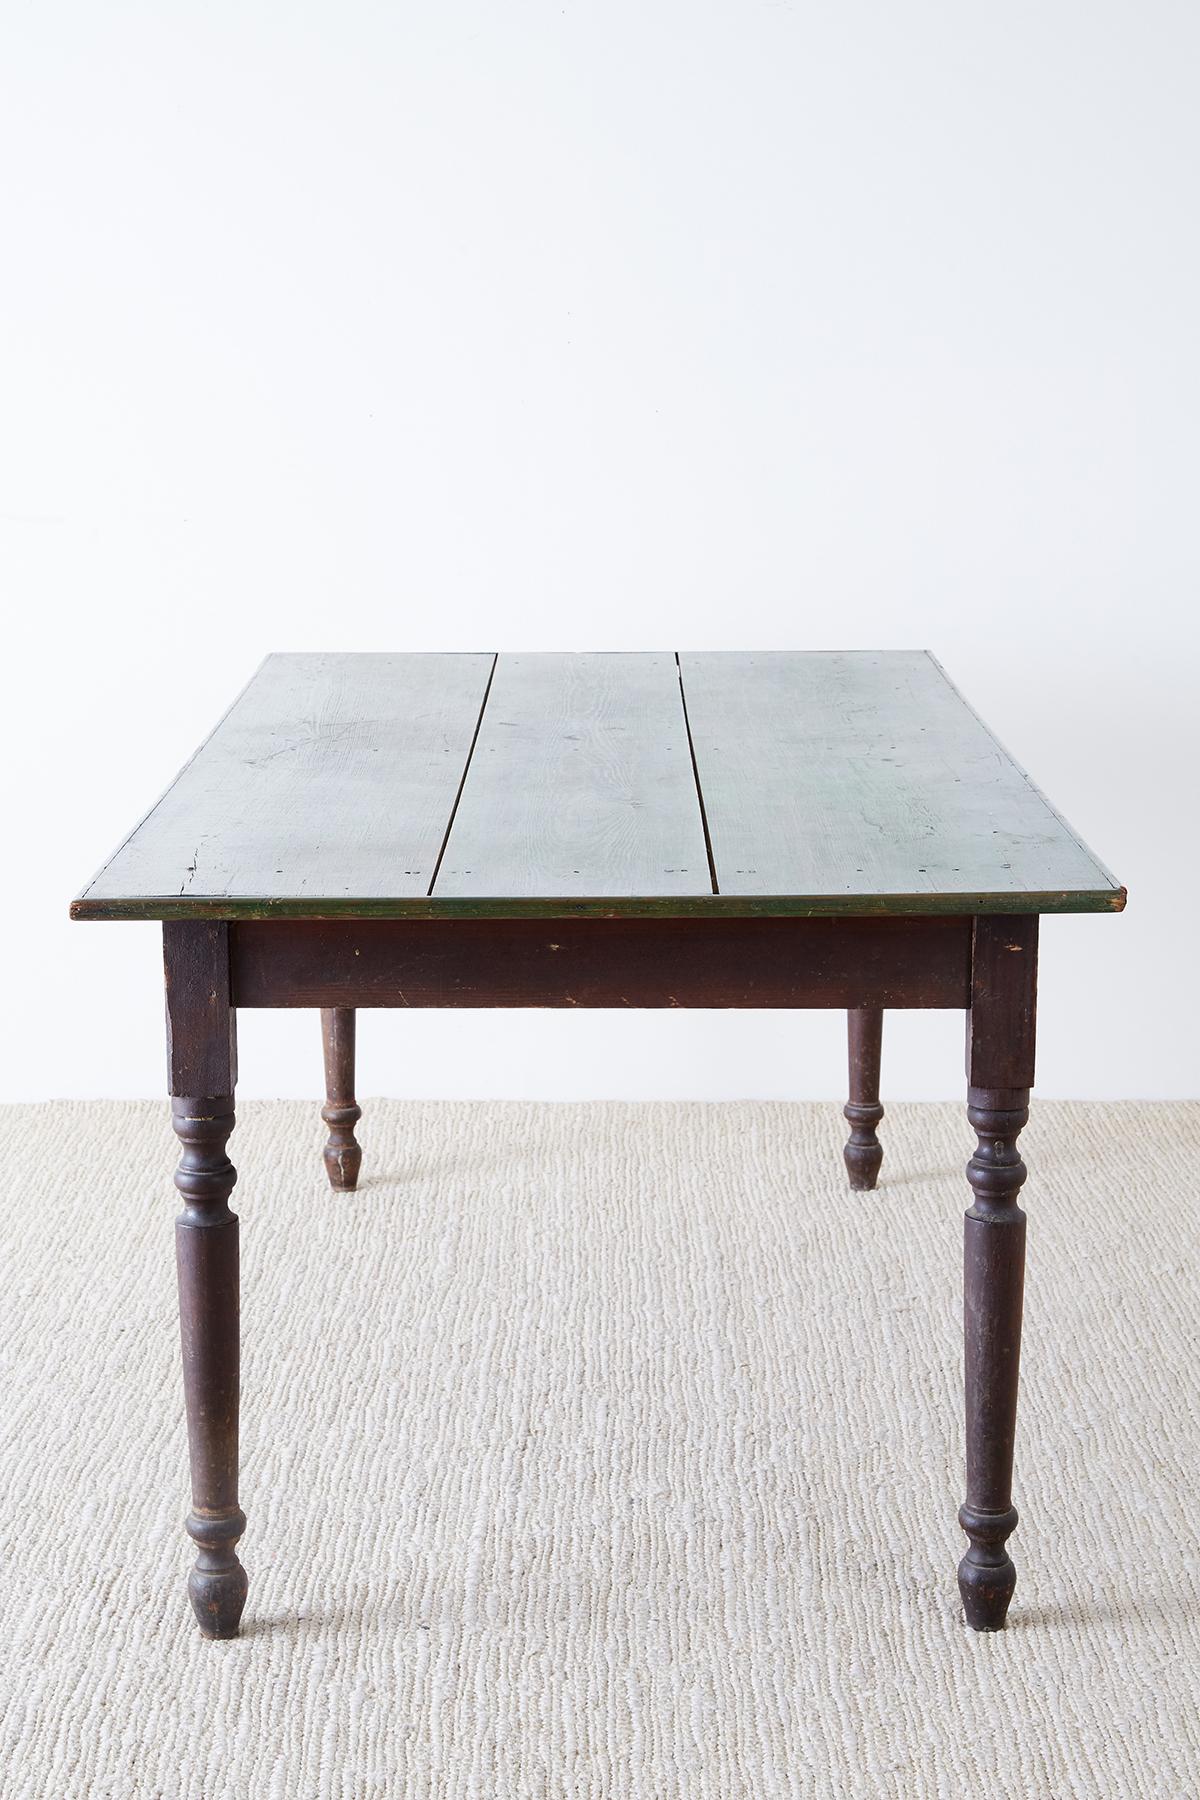 19th Century Rustic English Country Pine Farmhouse Dining Table